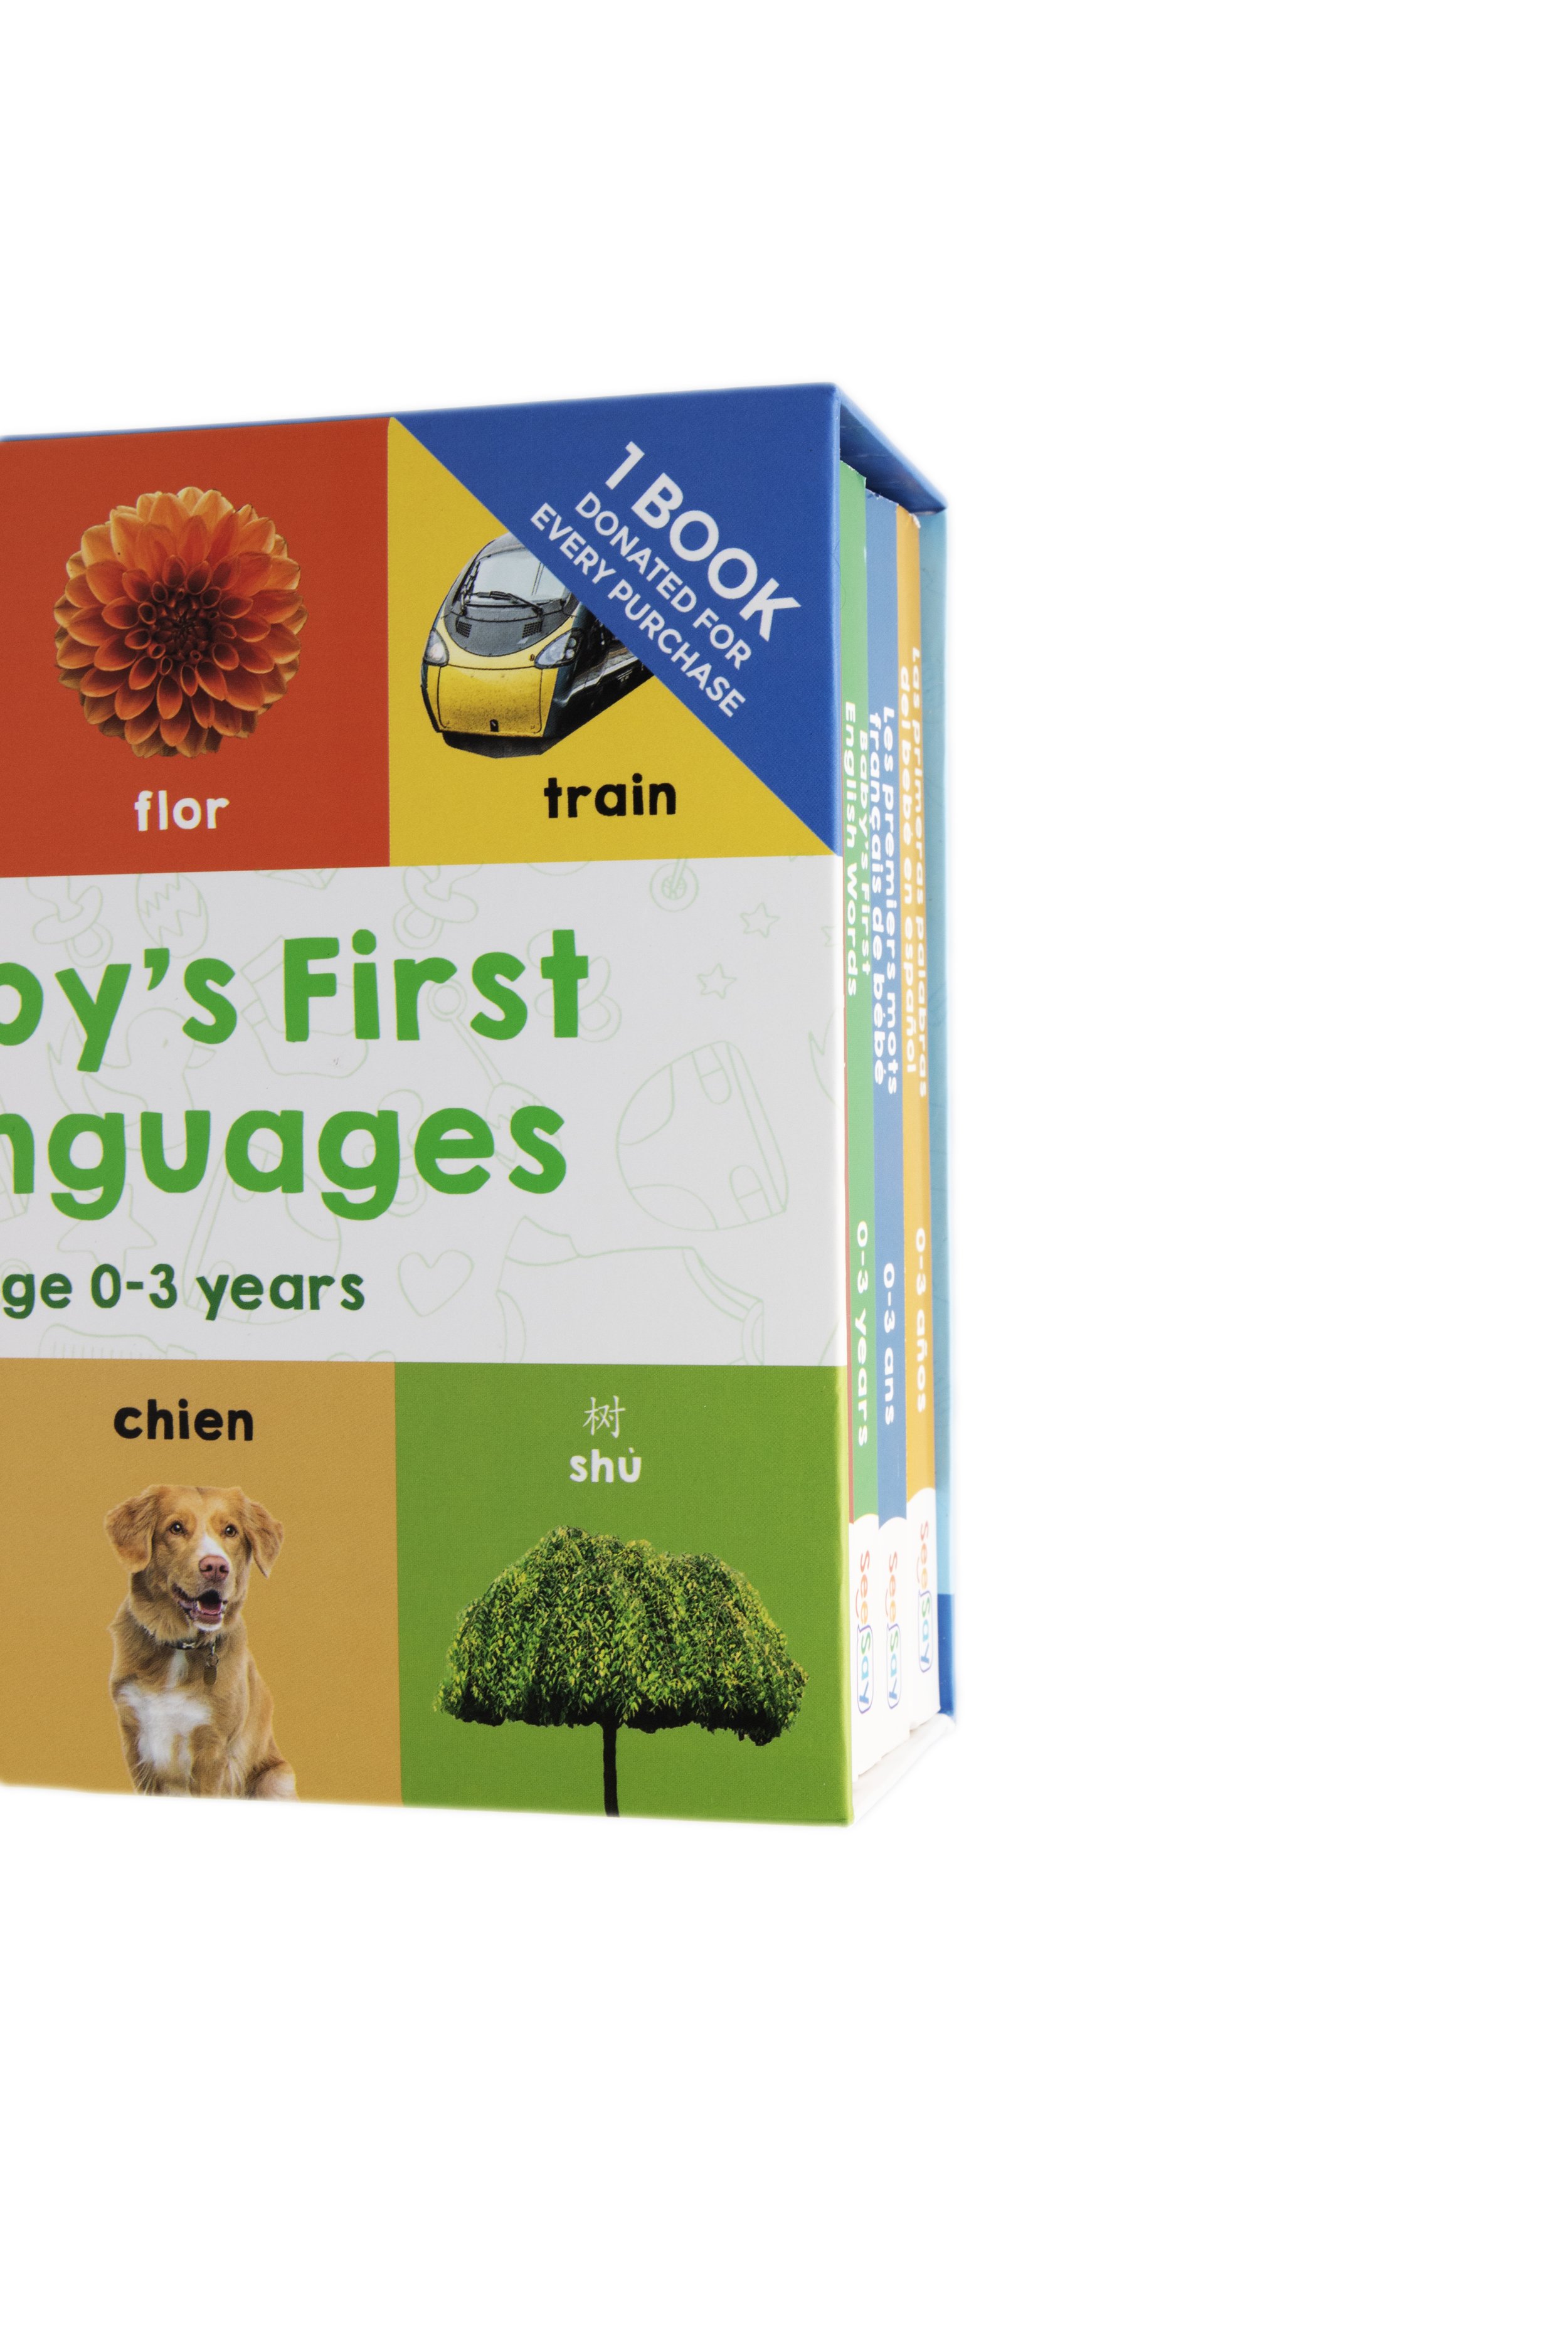  SeeSay is a baby’s first languages book for babies to learn four languages in early development.   The set contains local images of that word so that babies can recognise what the word means. I photographed objects for the English book. 